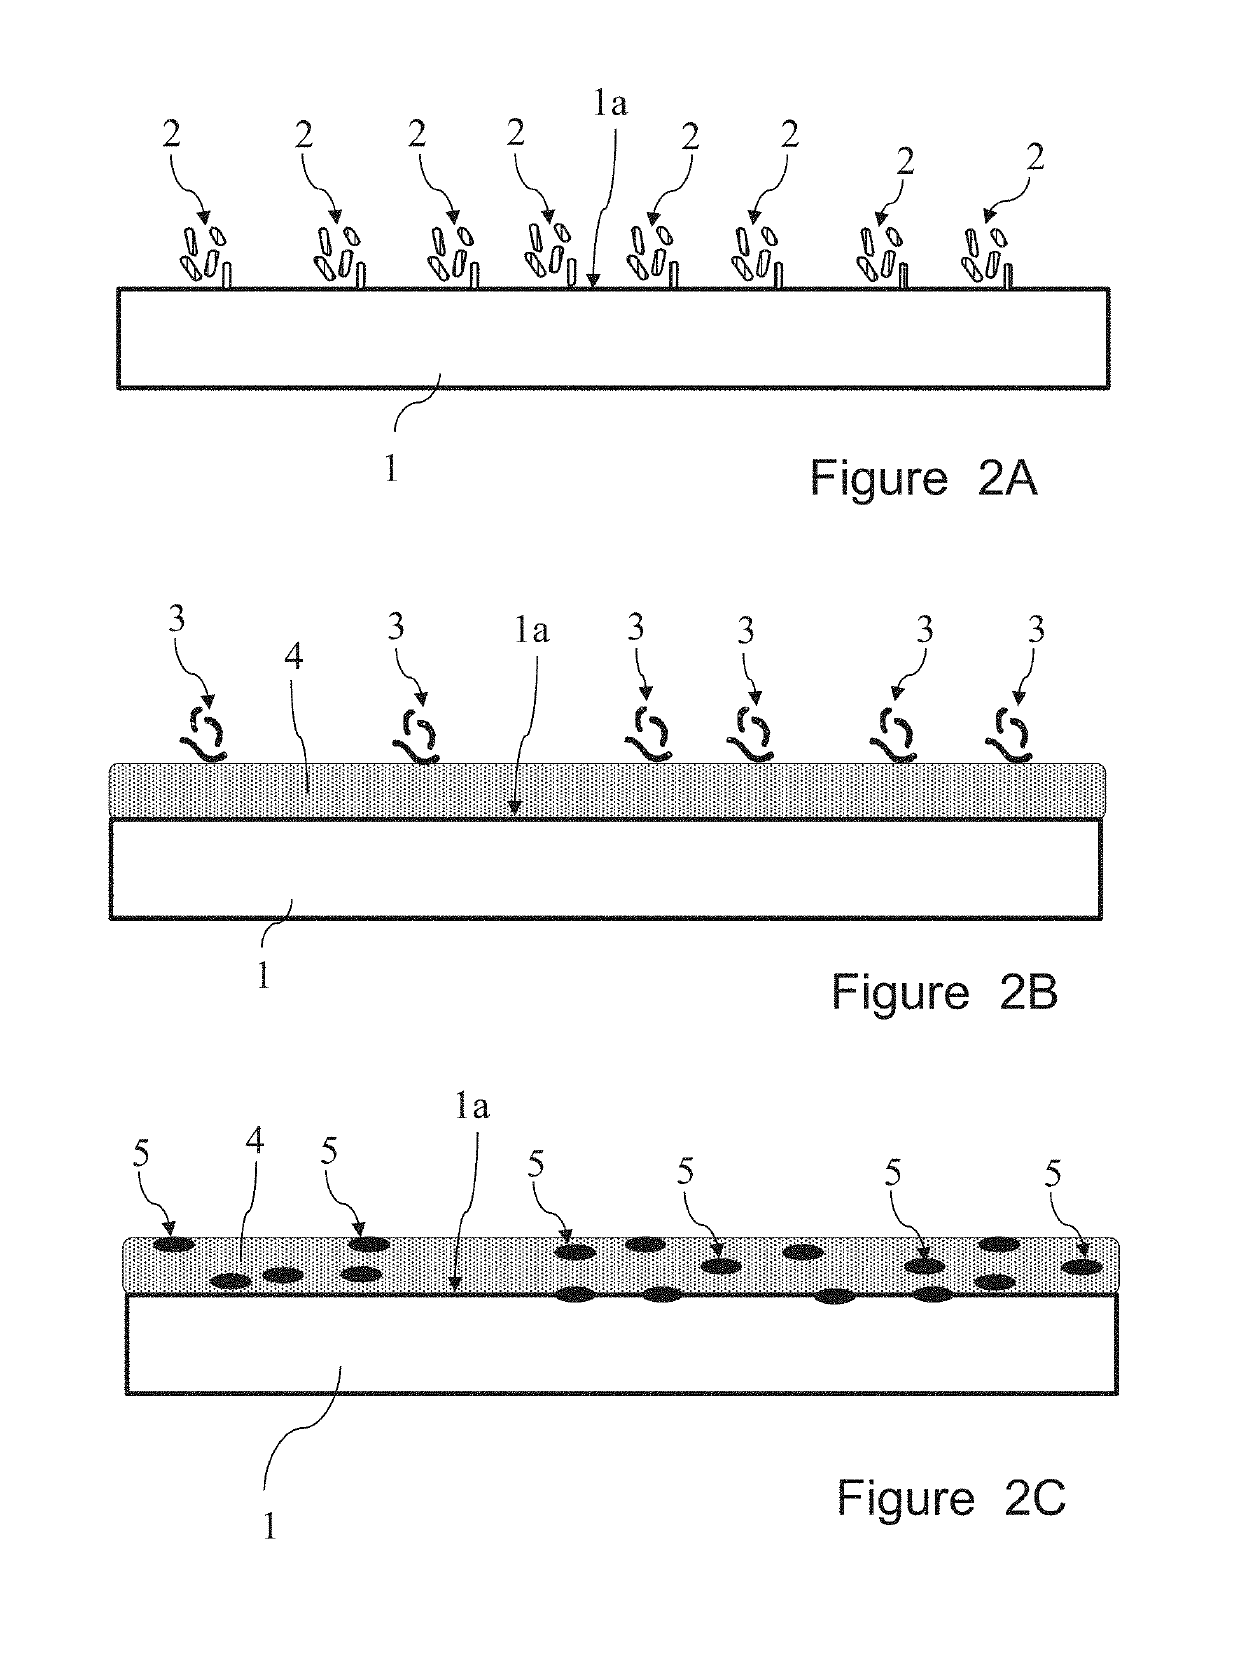 Process for preparing a dyed biopolymer and products thereof